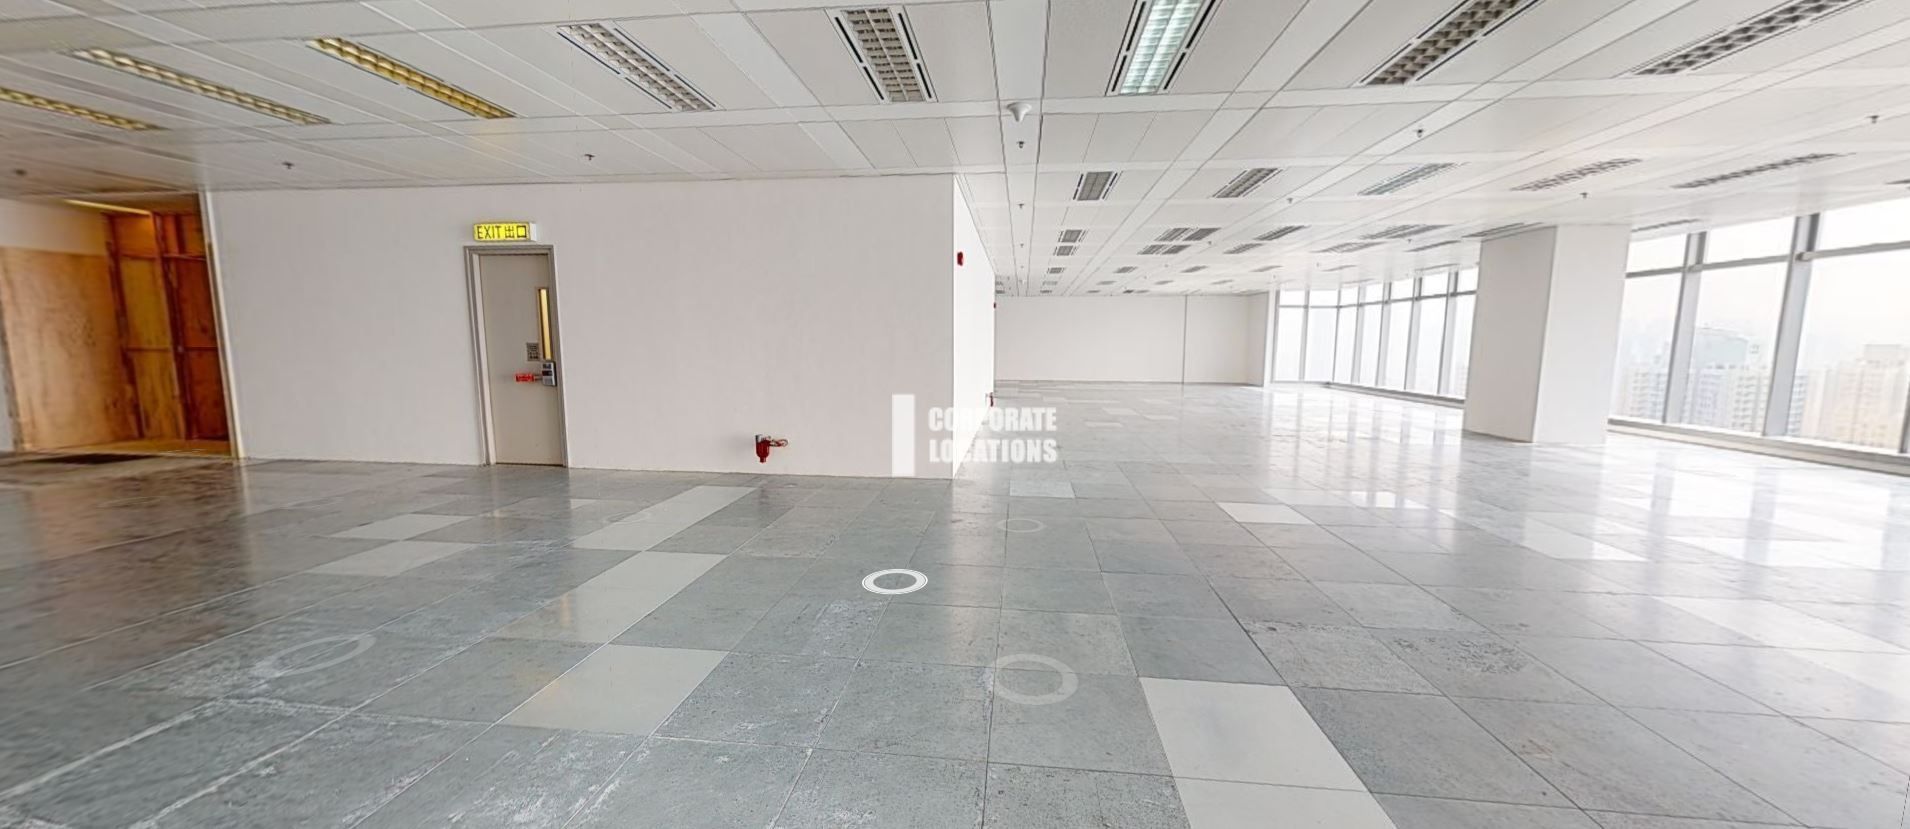 Lease offices in AIA Financial Centre  - Kowloon Others